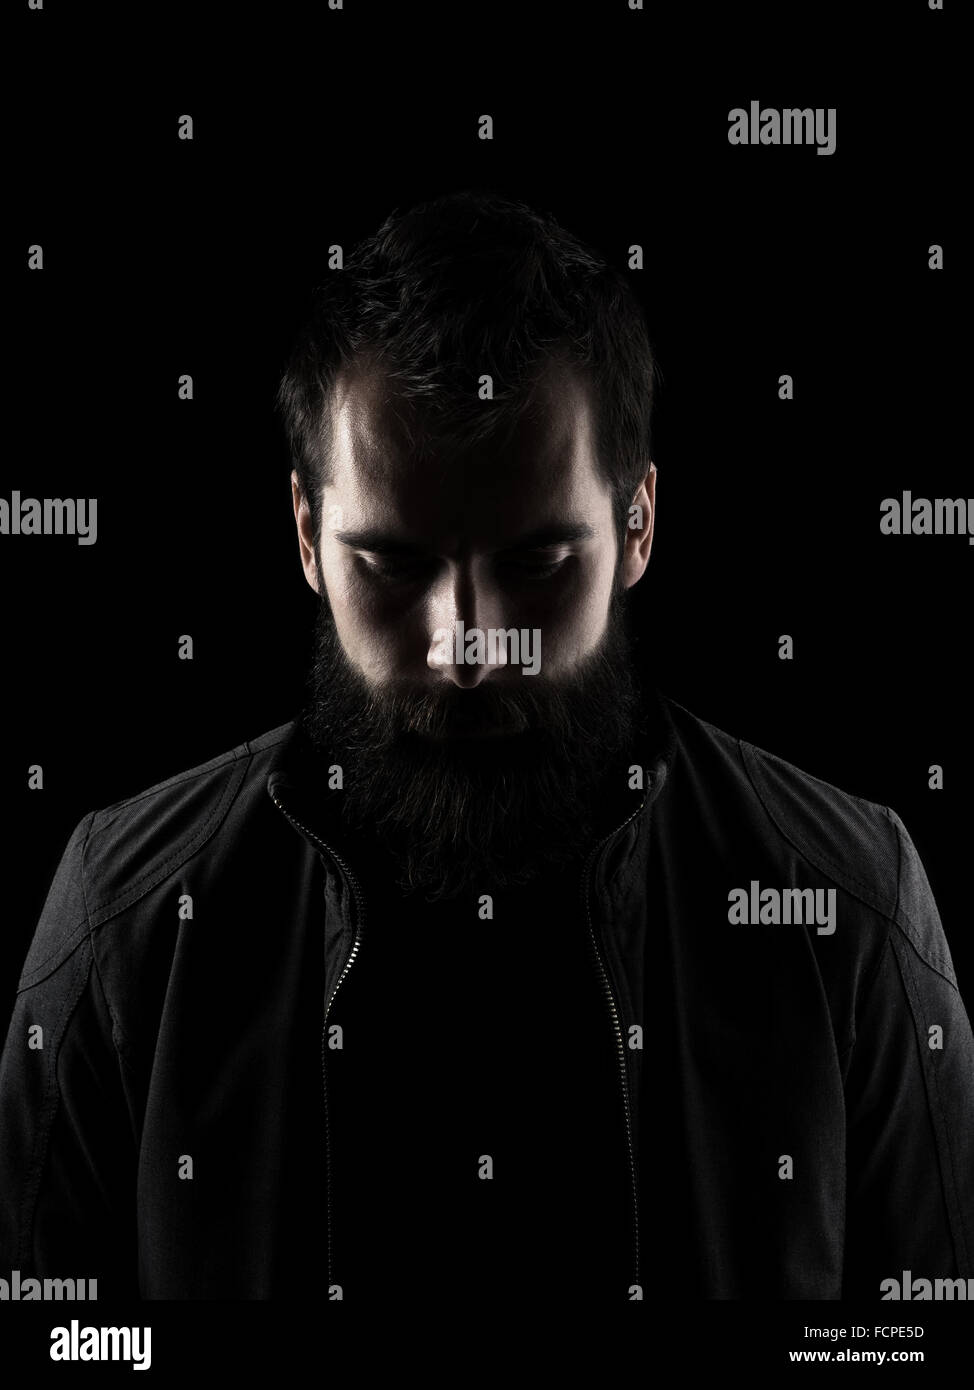 Sad bearded man looking down. High contrast low key dark shadow portrait isolated over black background. Stock Photo